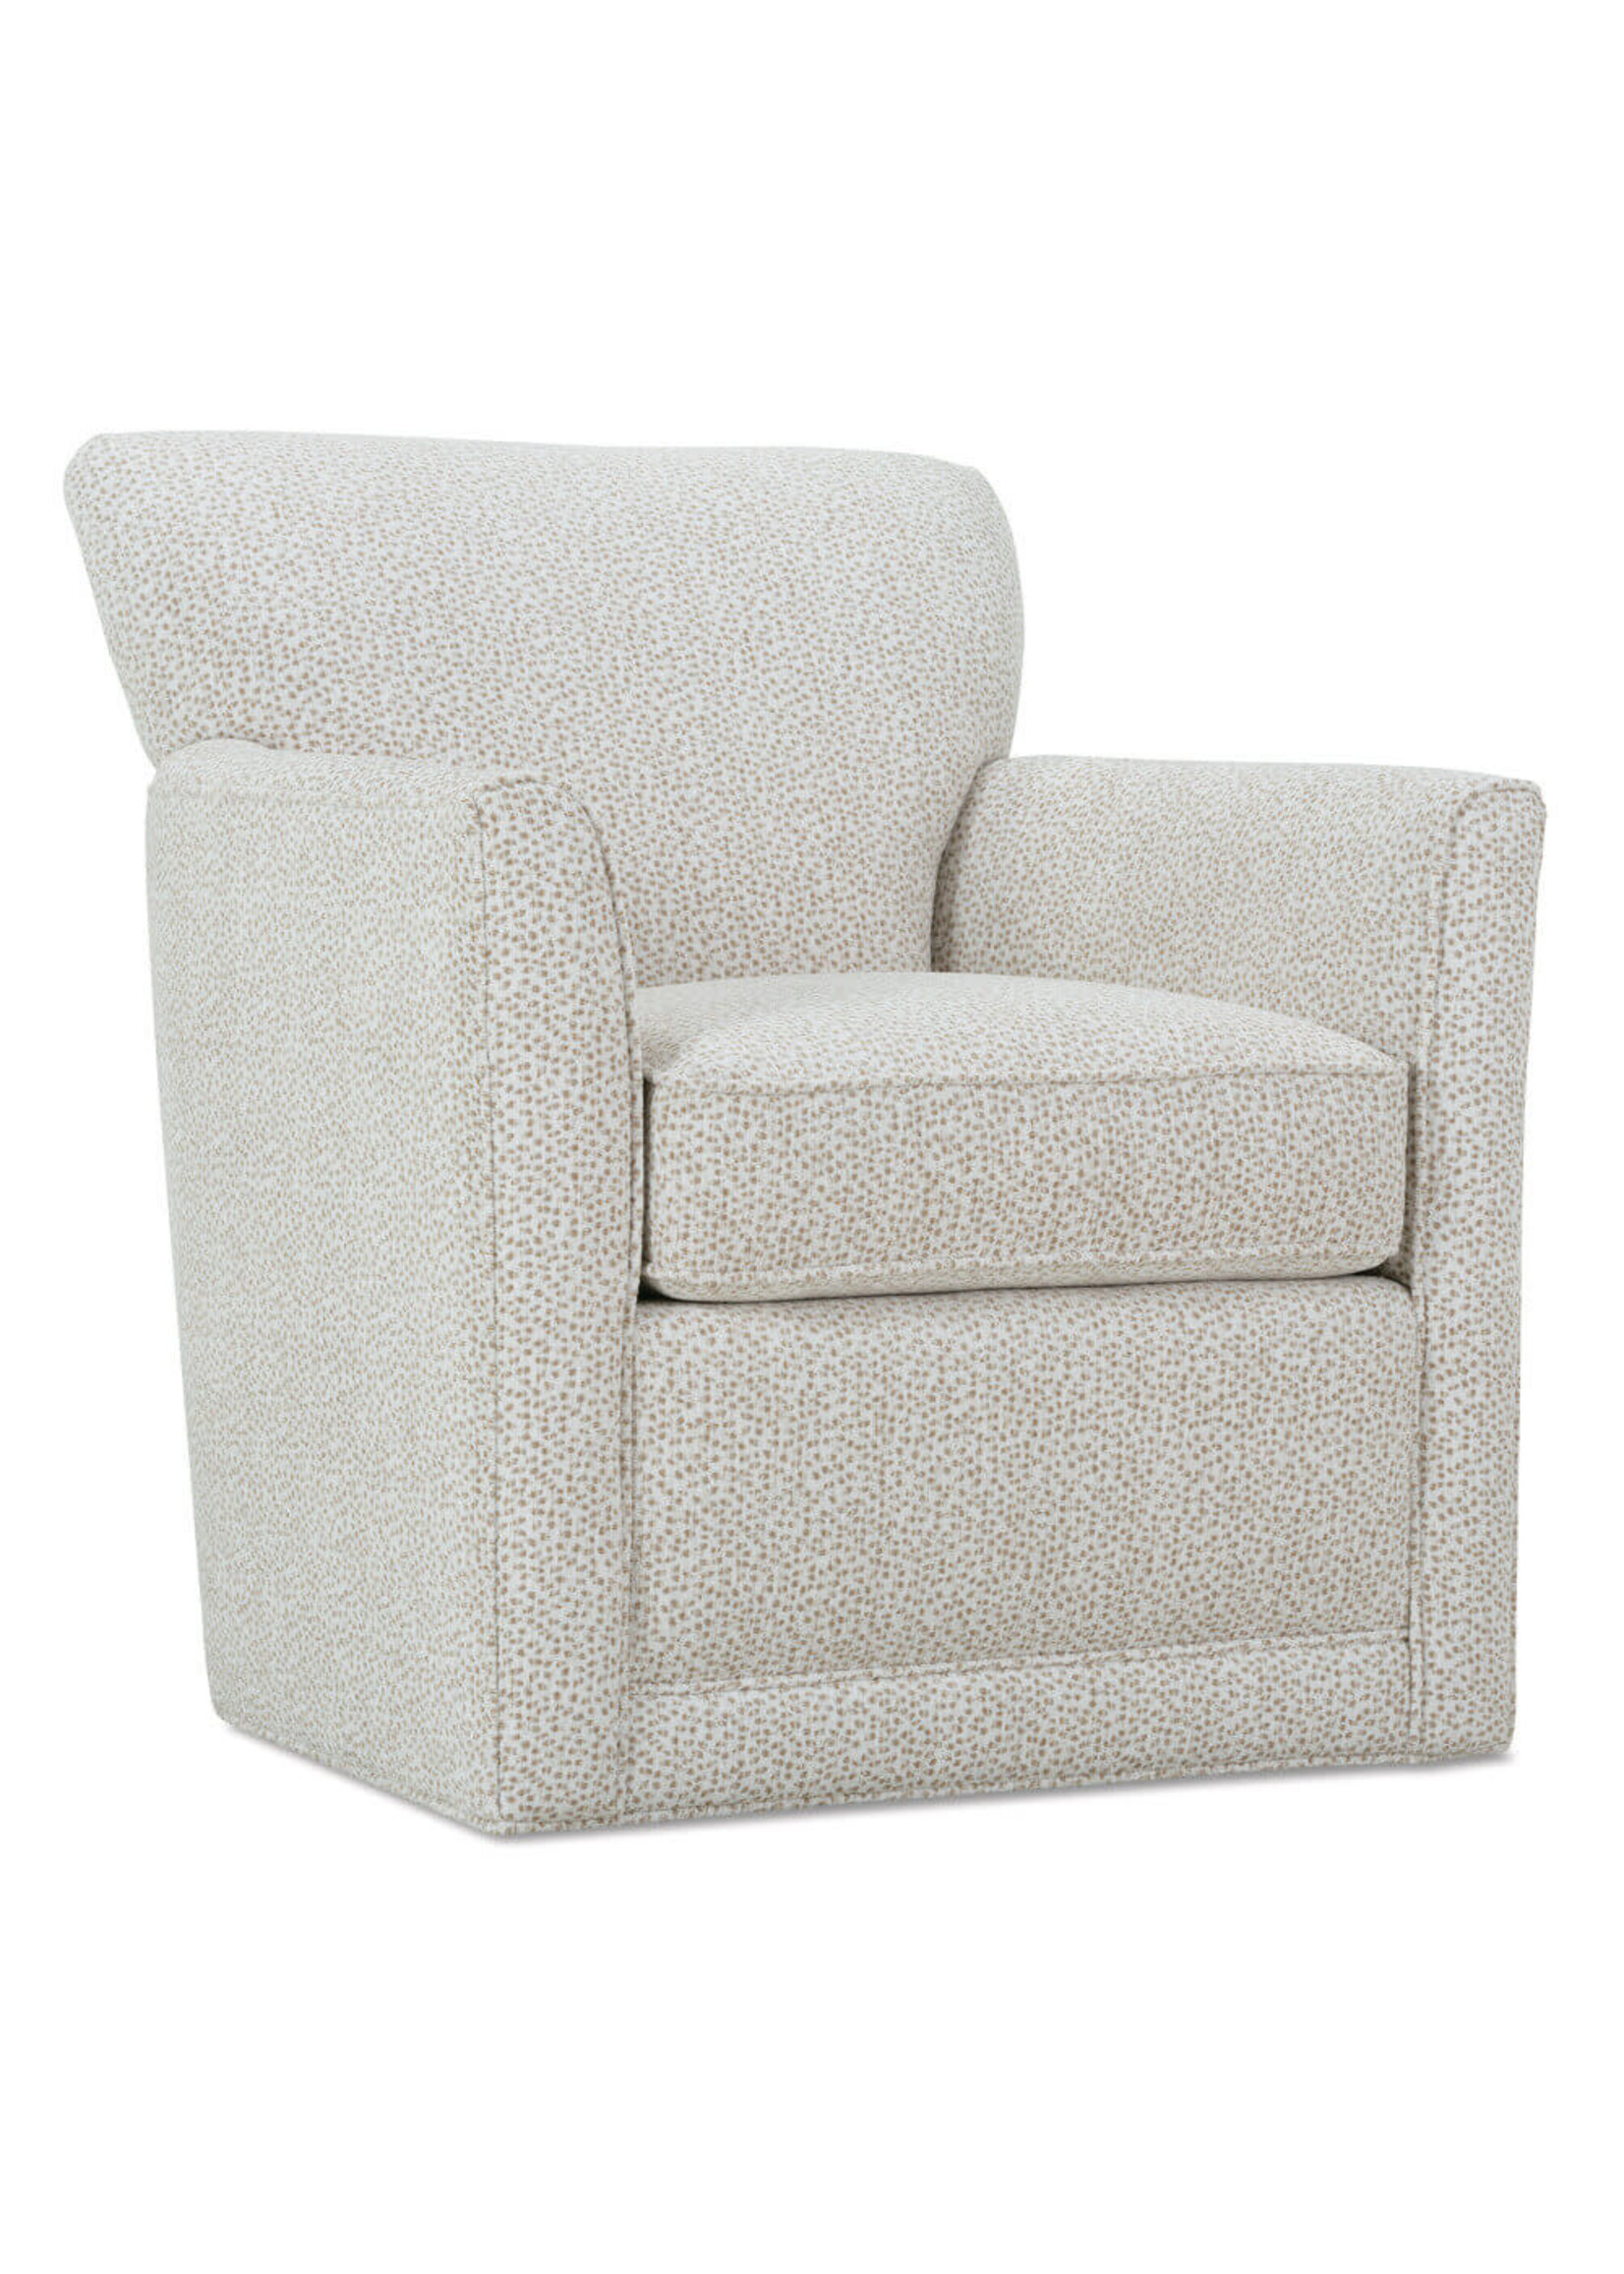 Quick Ship - Times Square Swivel Chair - 22947-58 - Express